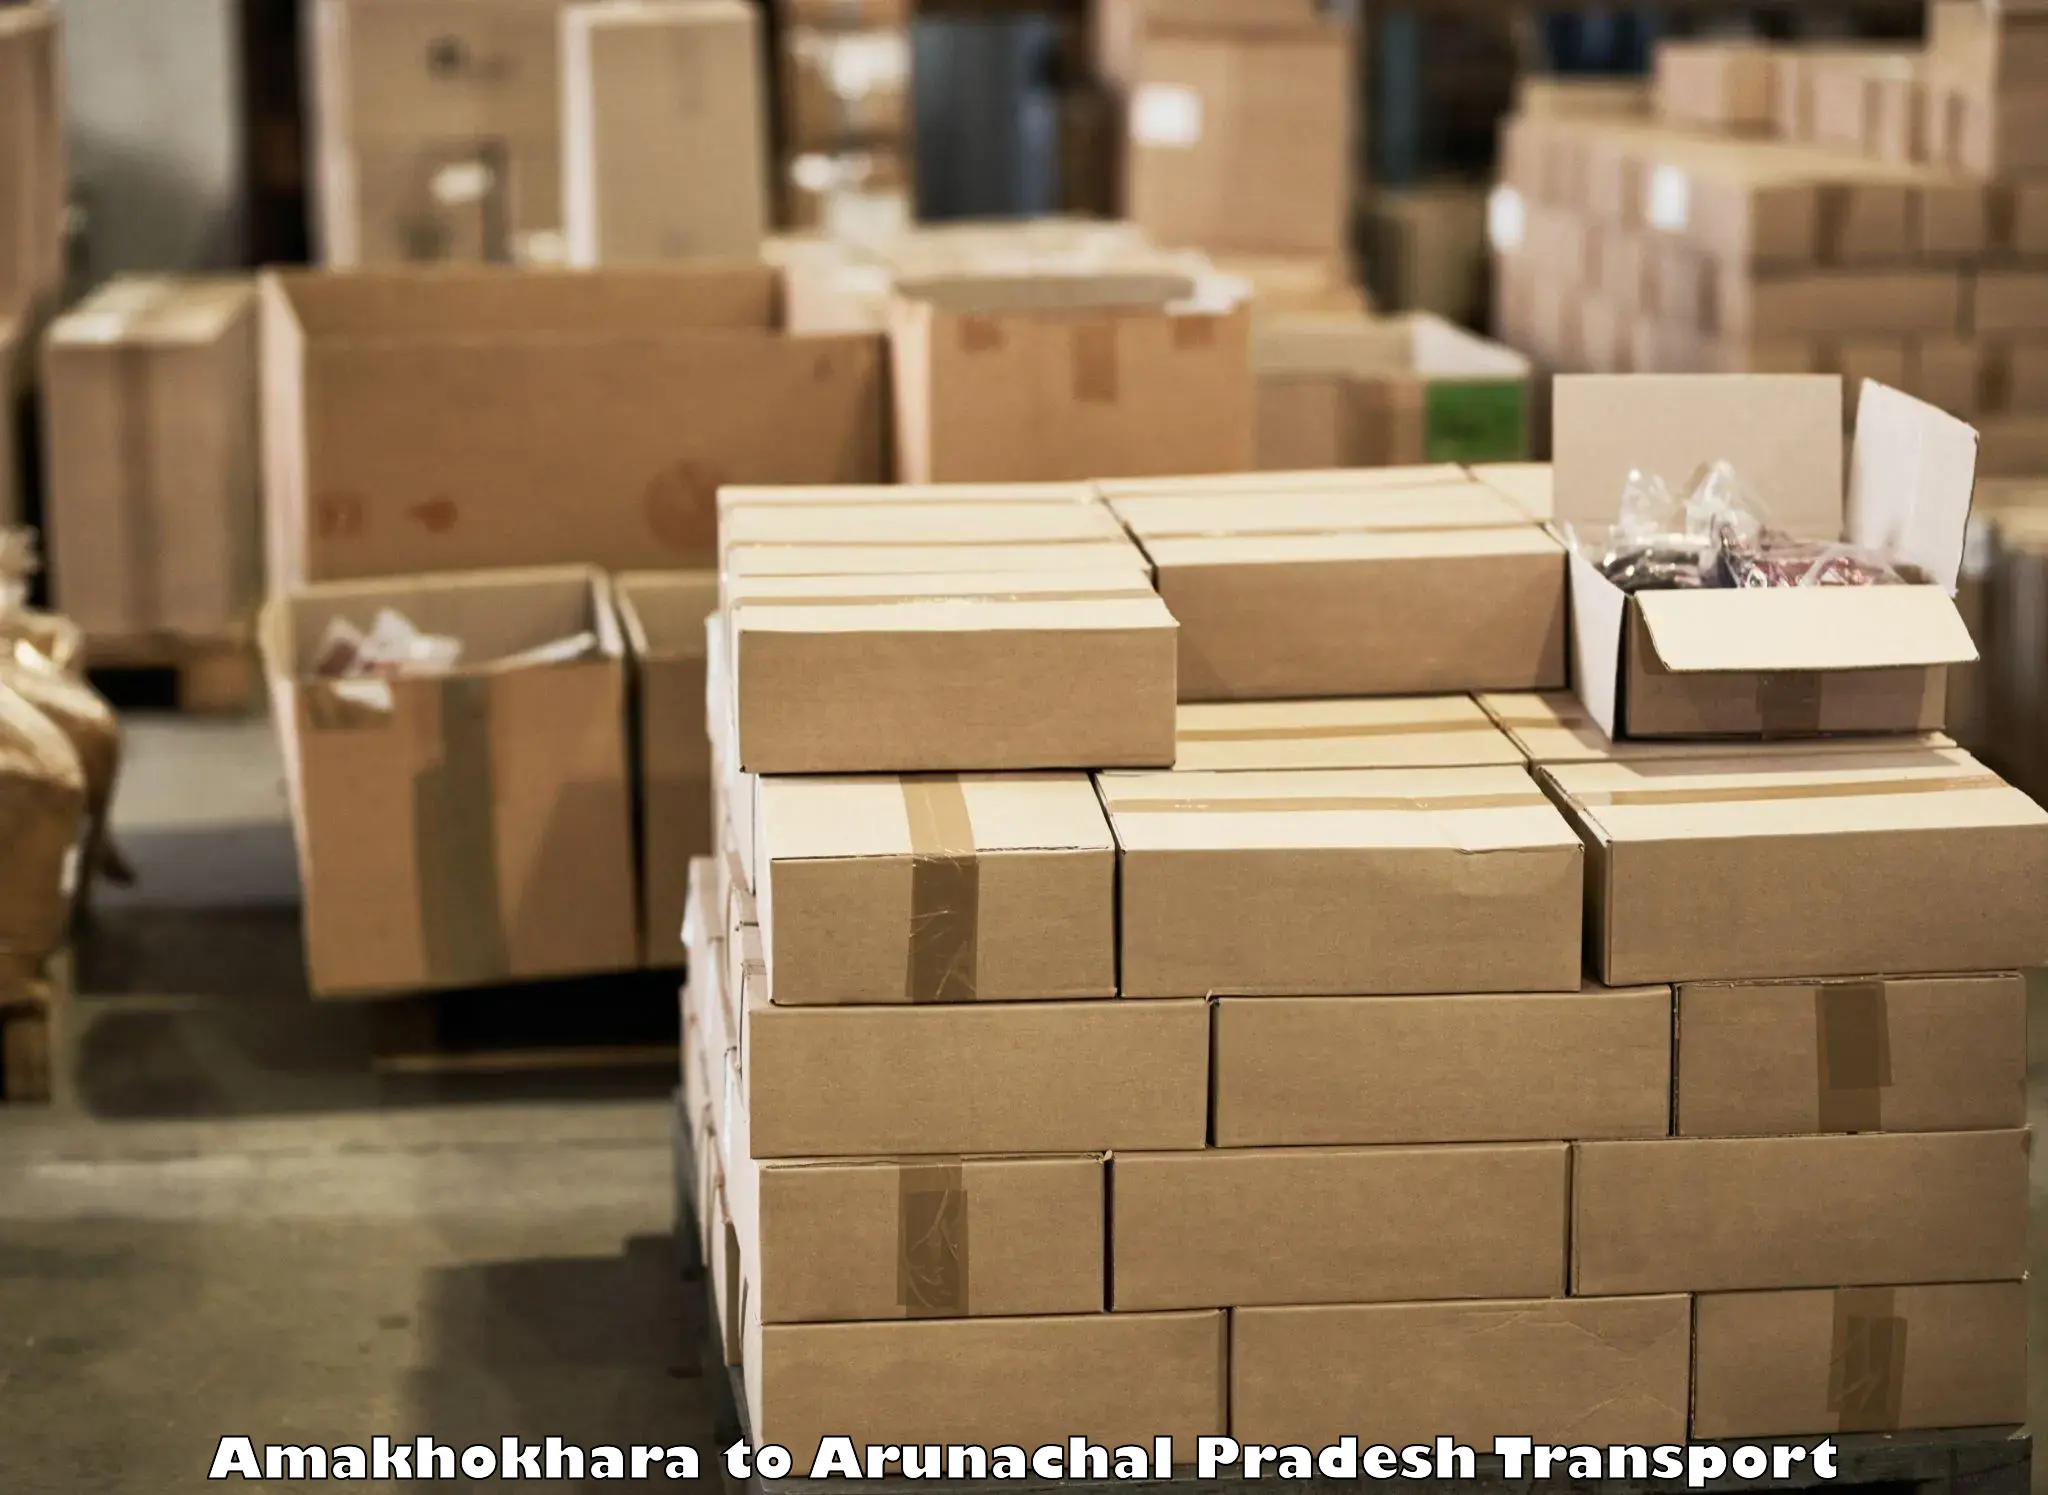 Best transport services in India Amakhokhara to Jairampur